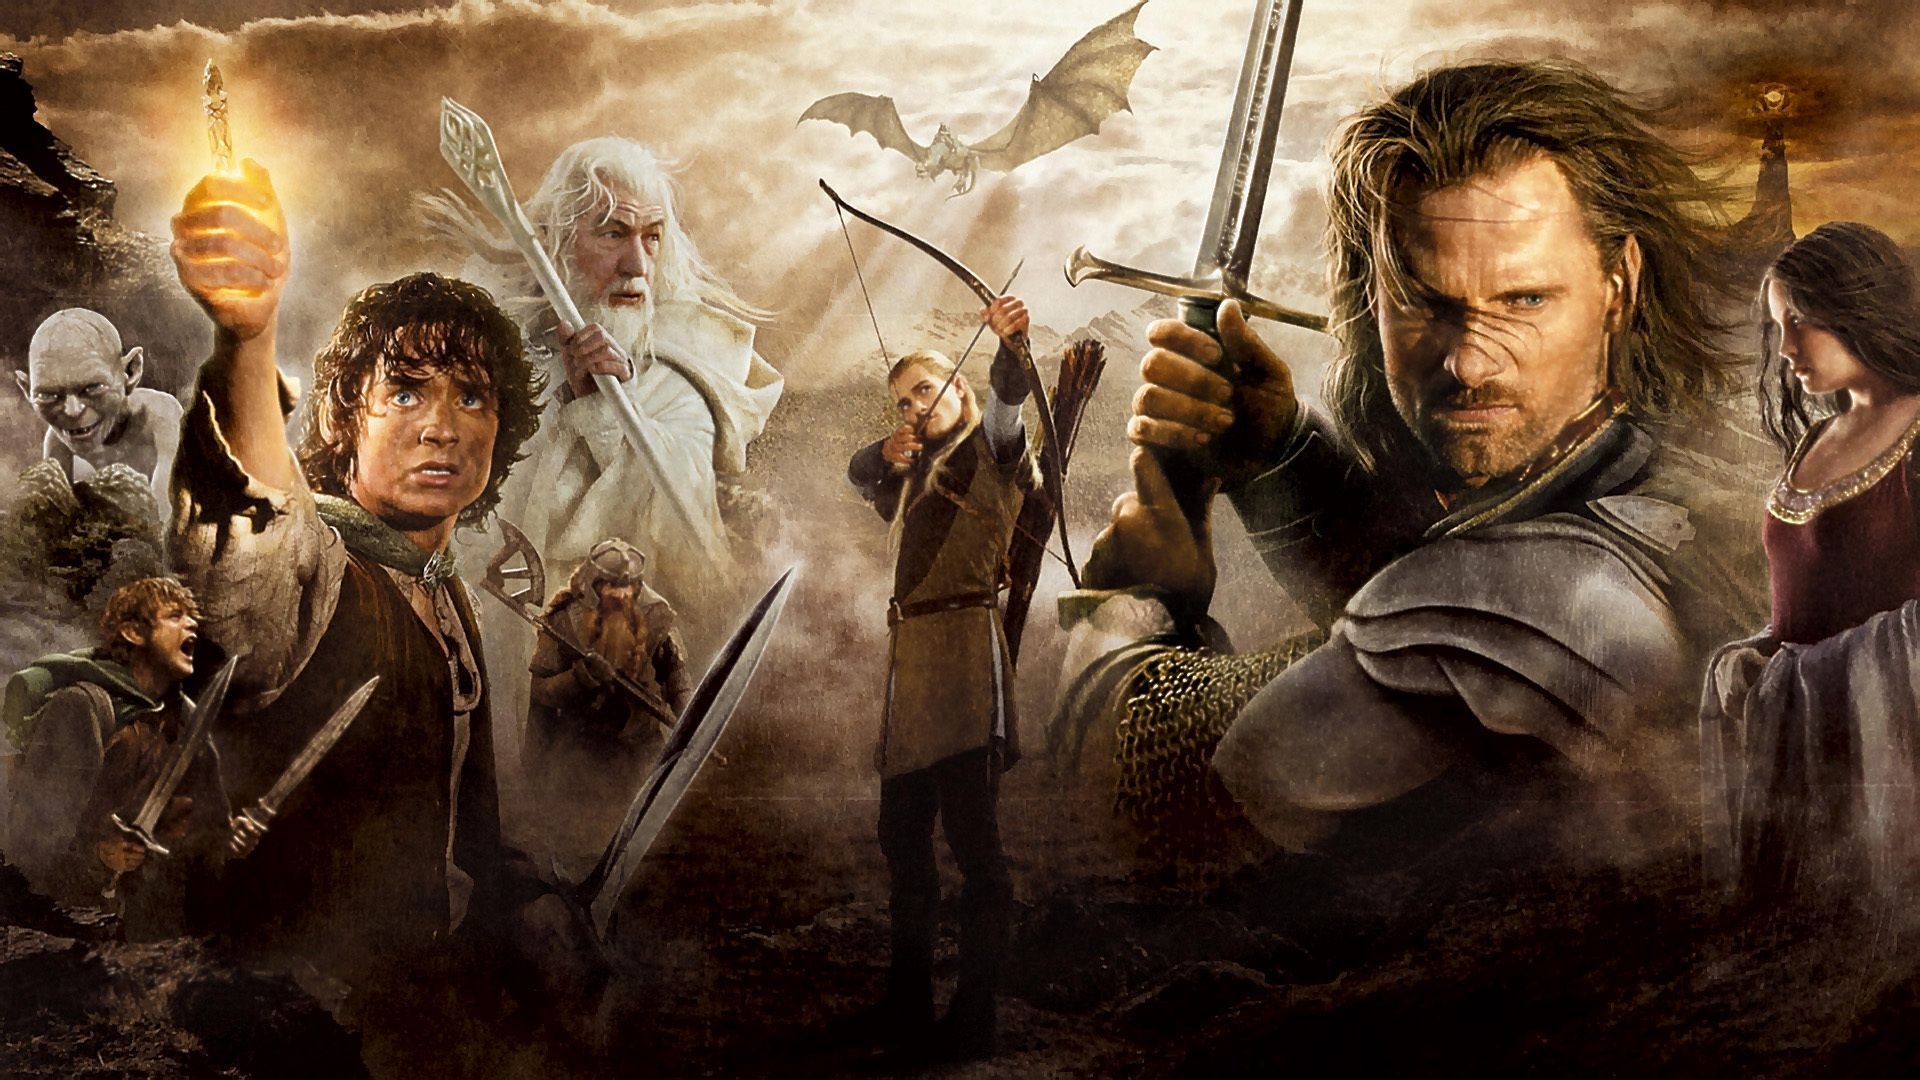 1920x1080 Lord Of The Rings TV Series Could Cost Amazon $1.3 Billion | Player.One